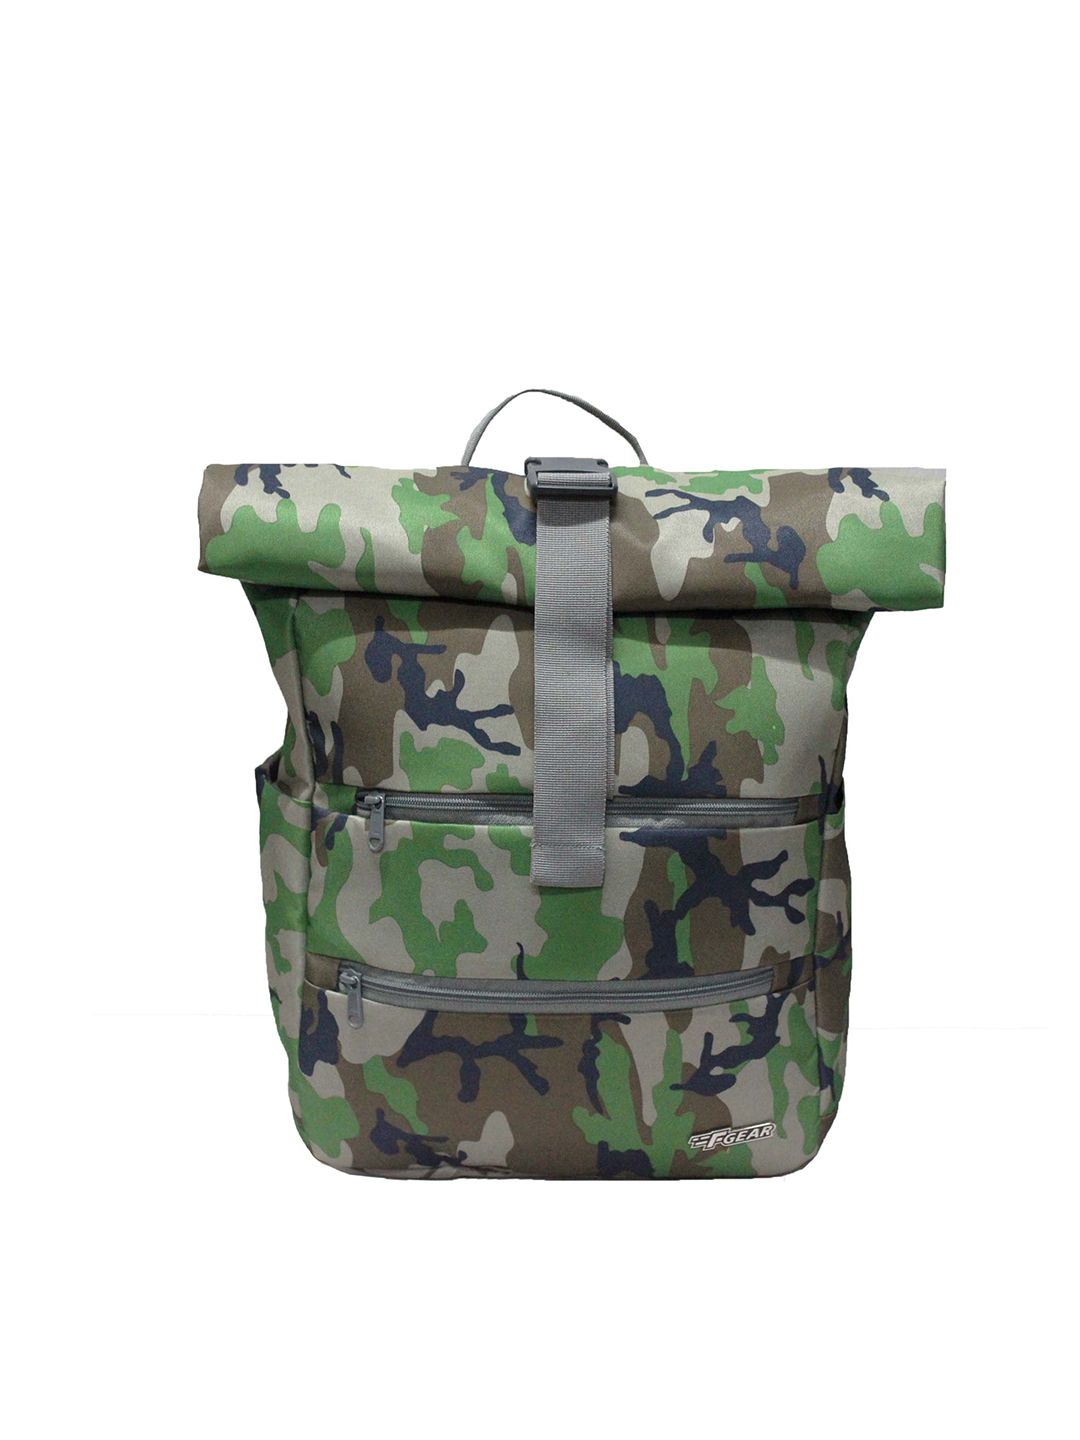 F Gear Unisex Green & Brown Camouflage Backpack Price in India